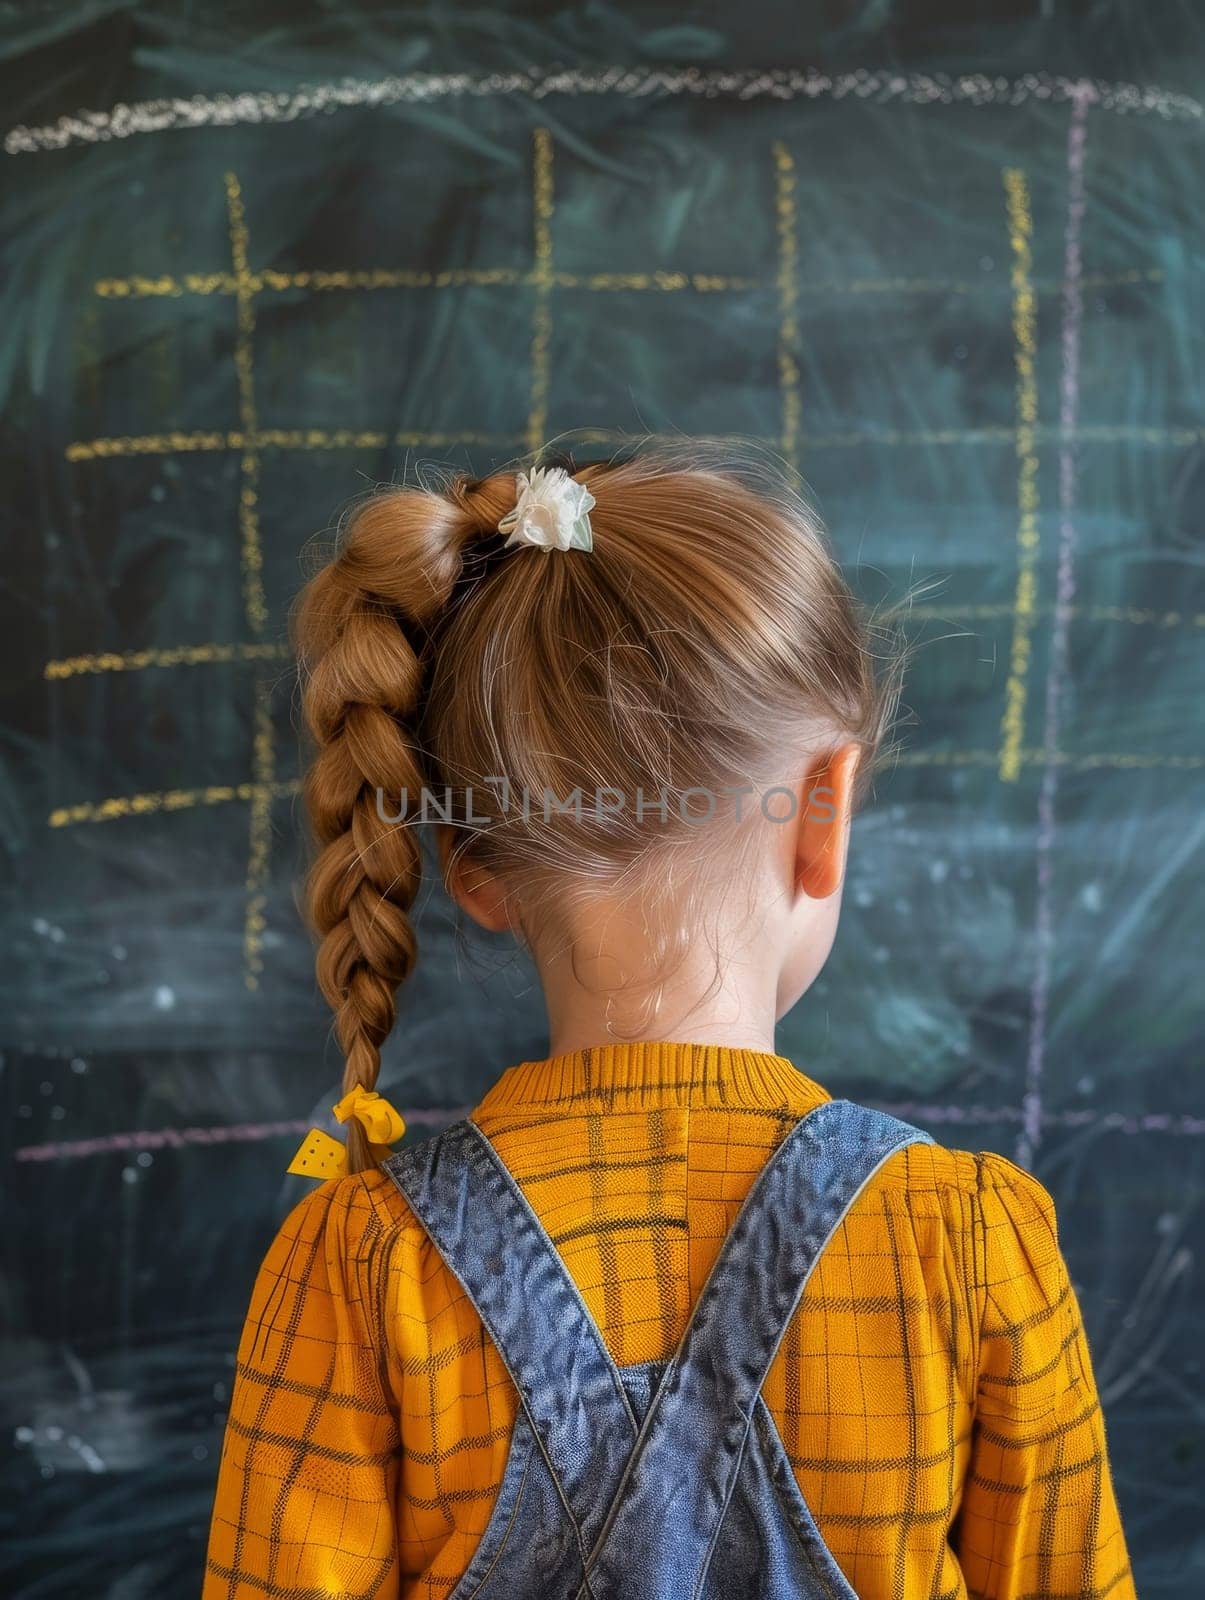 A young girl in a yellow shirt stands before a chalkboard covered in math equations. Her attention is captured by the complex problems ahead.